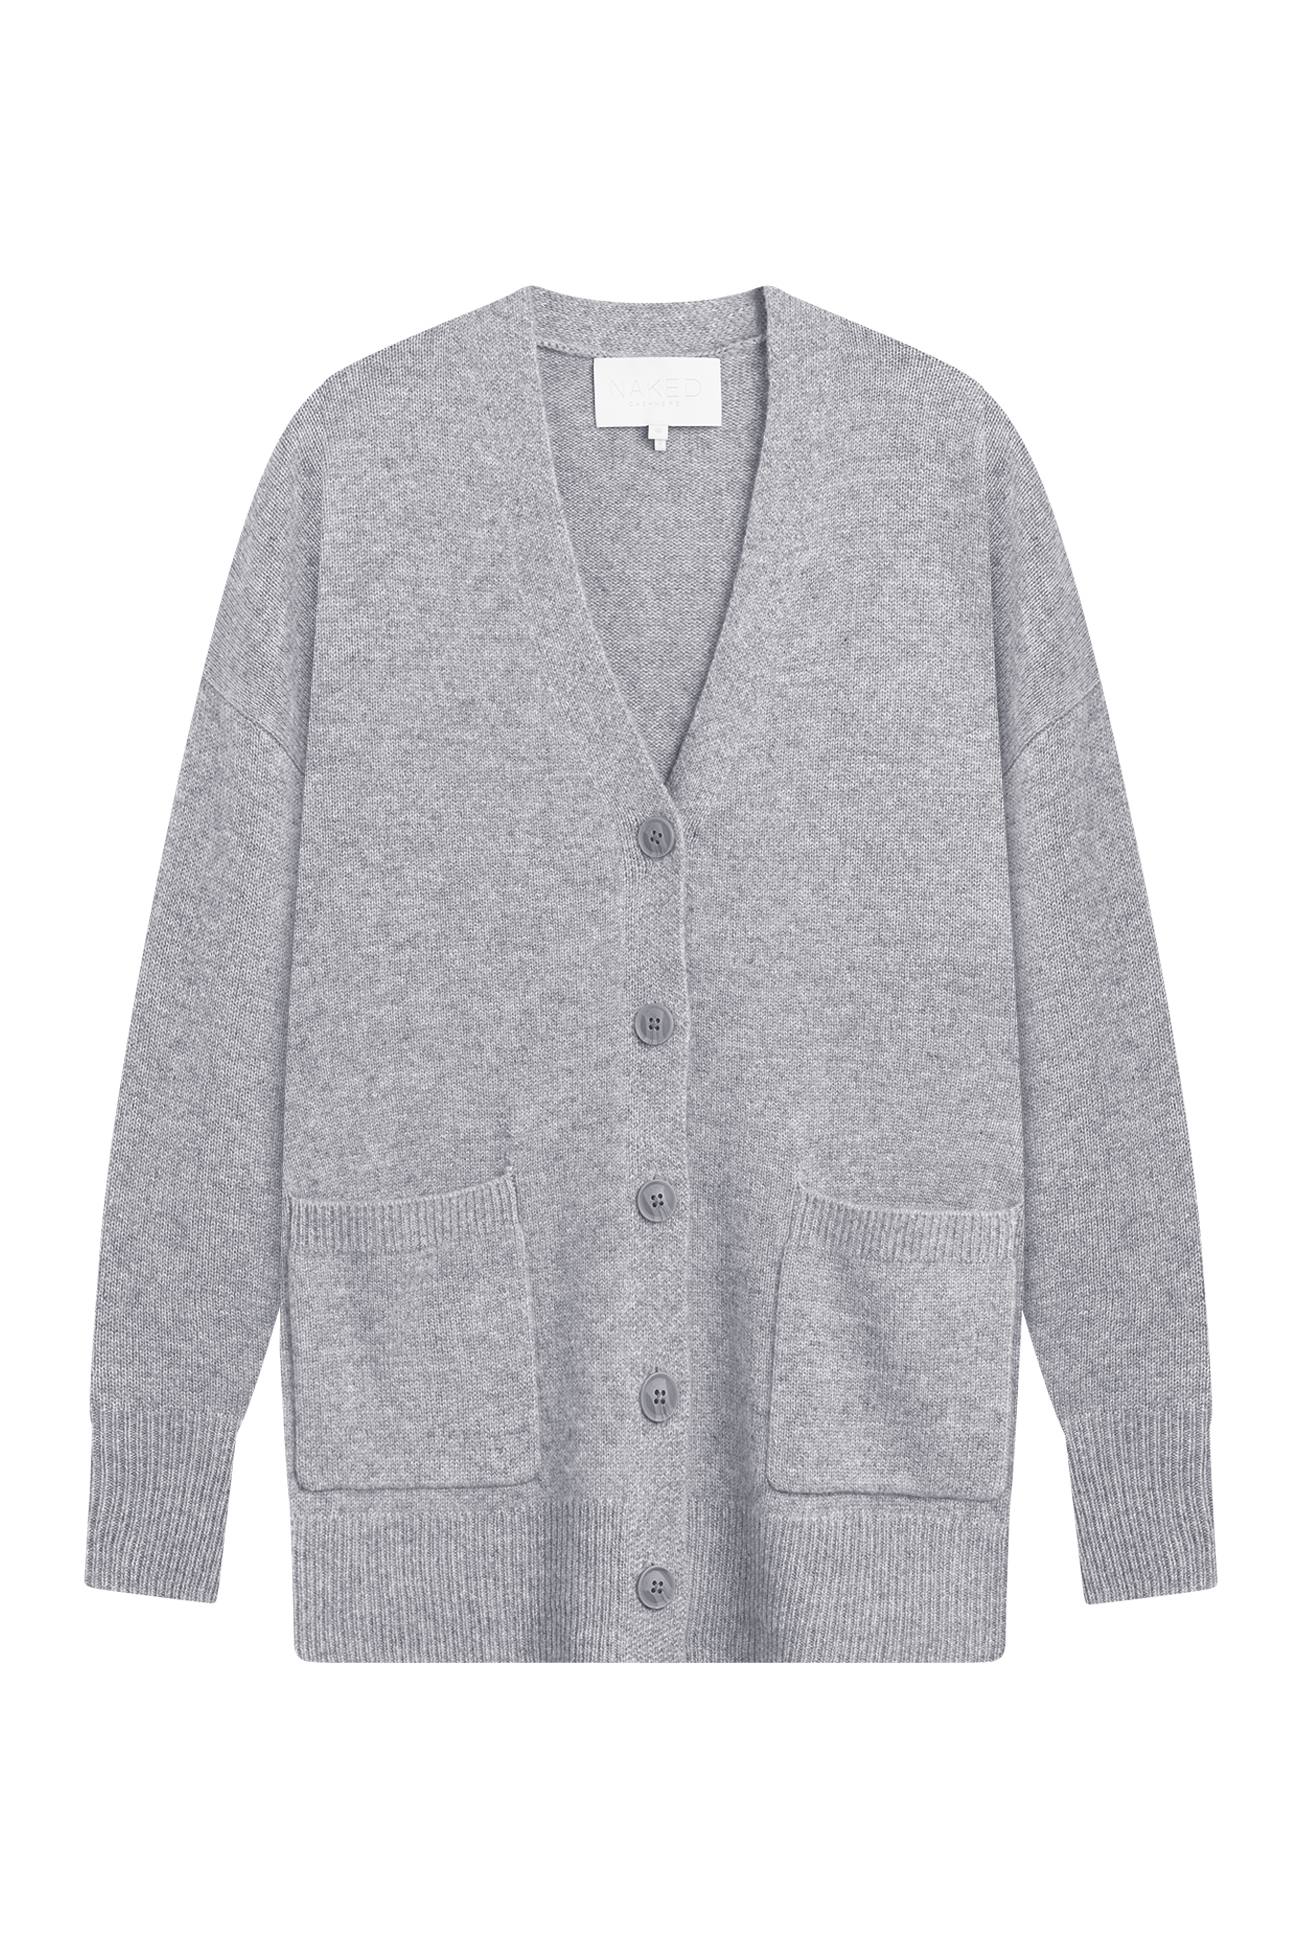 LILY BUTTON-UP CASHMERE CARDIGAN